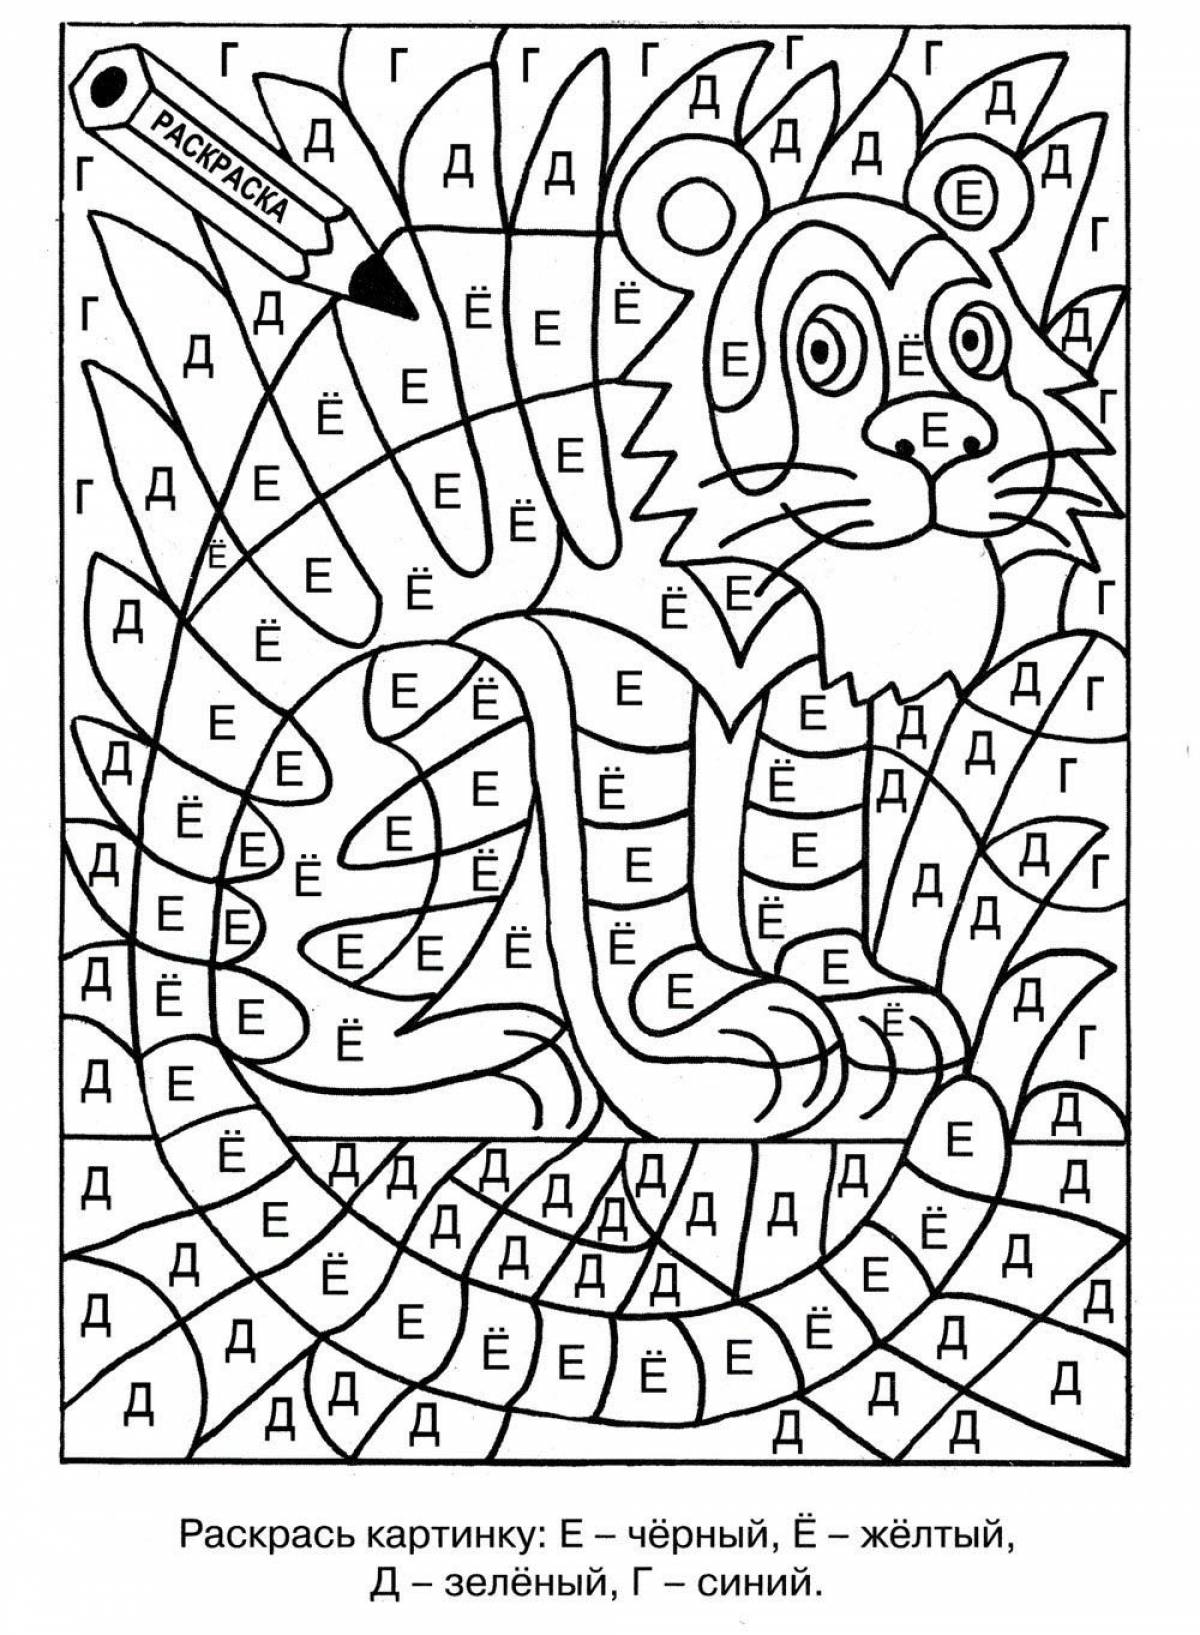 Coloring book for children 7-8 years old